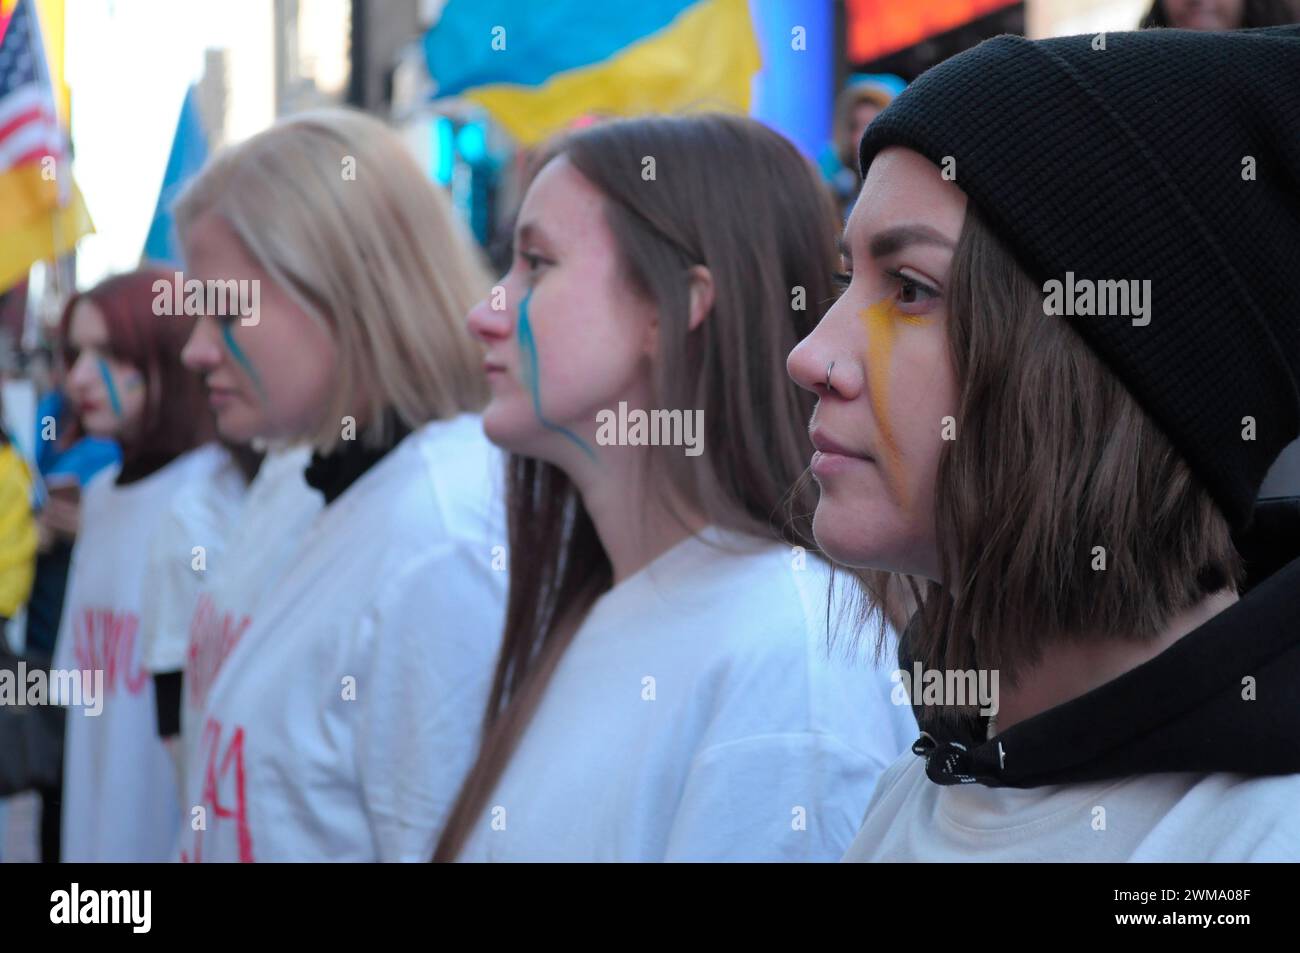 Pro-Ukraine demonstrators, each wearing a t-shirt with a name of a Ukrainian city written on it, rally in Times Square. Demonstrators rallied in Manhattan, New York City on the two-year anniversary of the Russian invasion of Ukraine. Protestors condemned the invasion and opposed Russian President, Vladimir Putin. Last weekend, Russian forces captured the eastern Ukrainian city of Avdiivka located on the front line. The loss of the city comes as a $60 billion aid package for Ukraine from the United States has been stalled following disagreements in Congress. Ukrainian President, Volodymyr Zelen Stock Photo